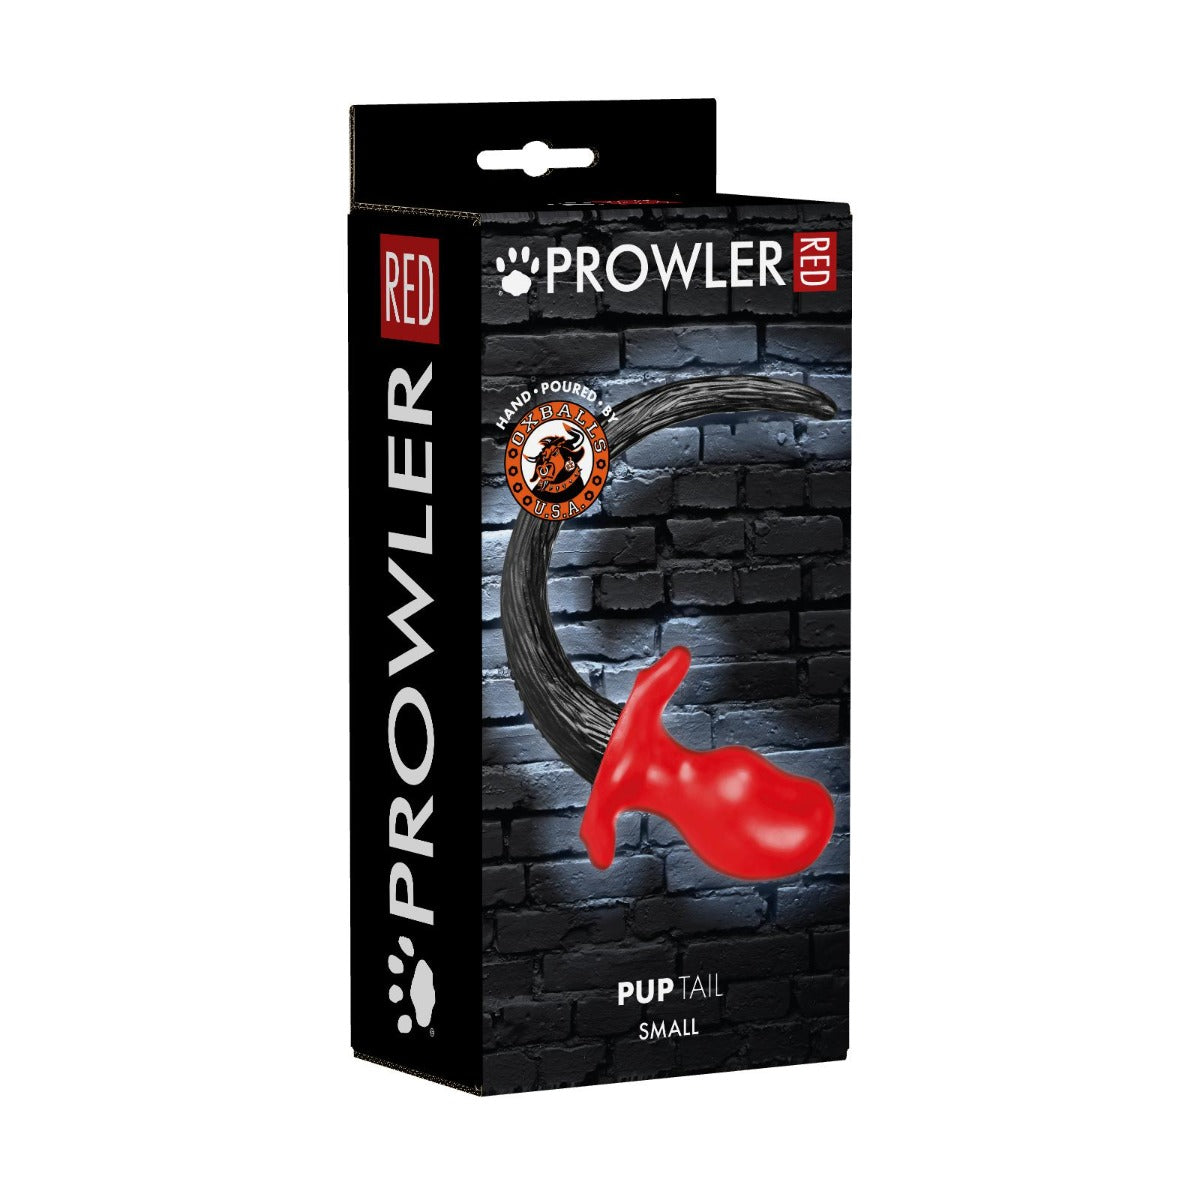 Prowler RED Puptail by Oxballs Small (7020971688100)